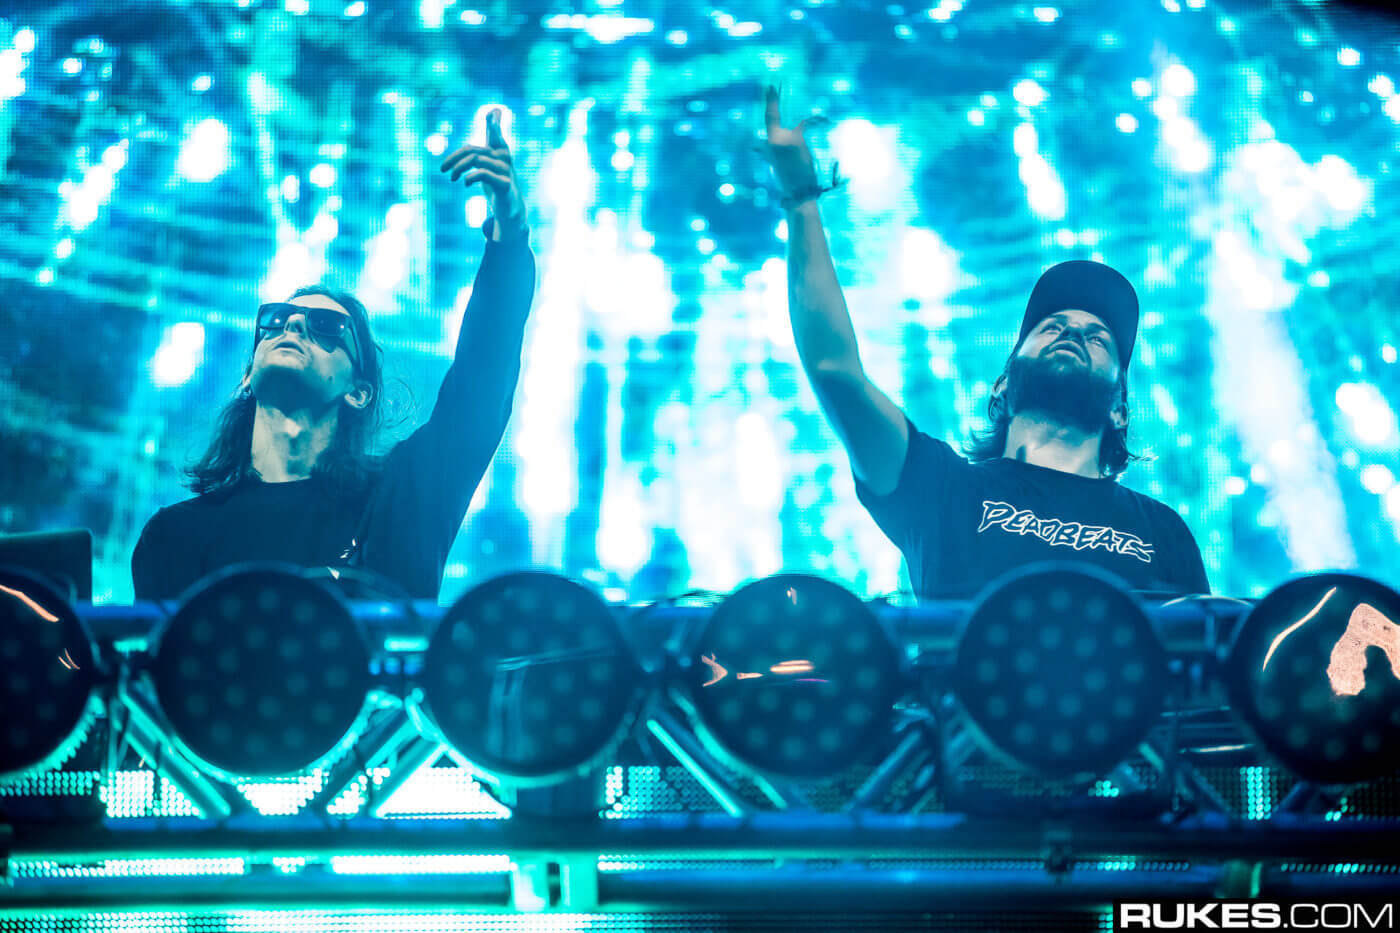 Take A Dreamy ‘Late Night Drive’ With New Zeds Dead